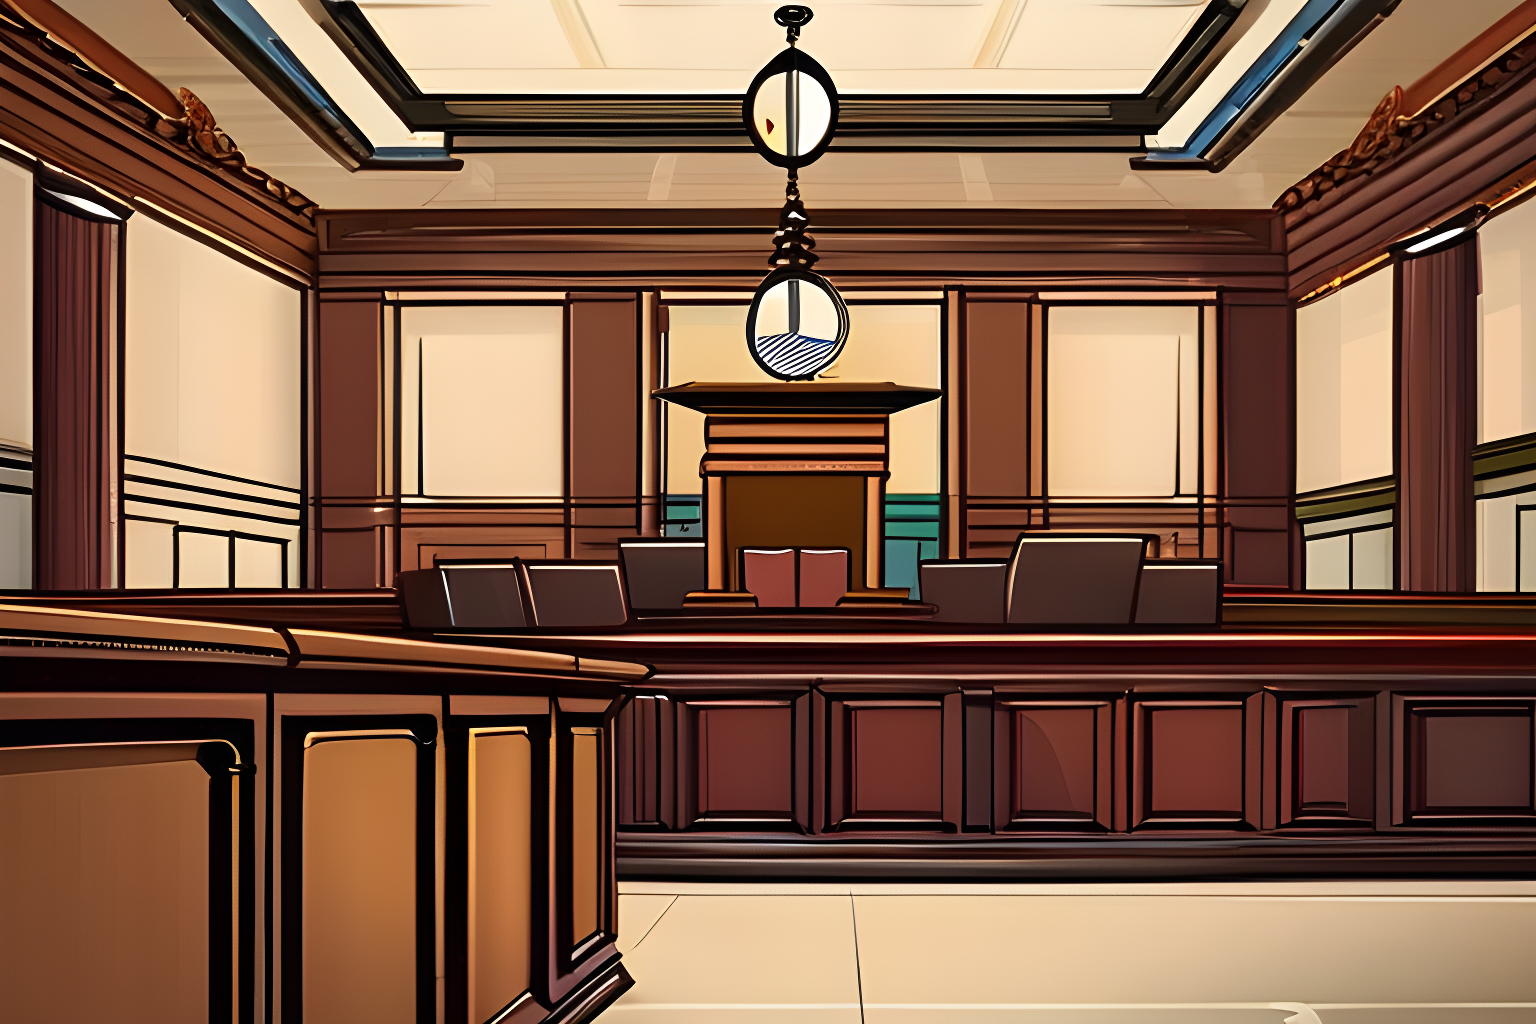 Illustrate a courtroom